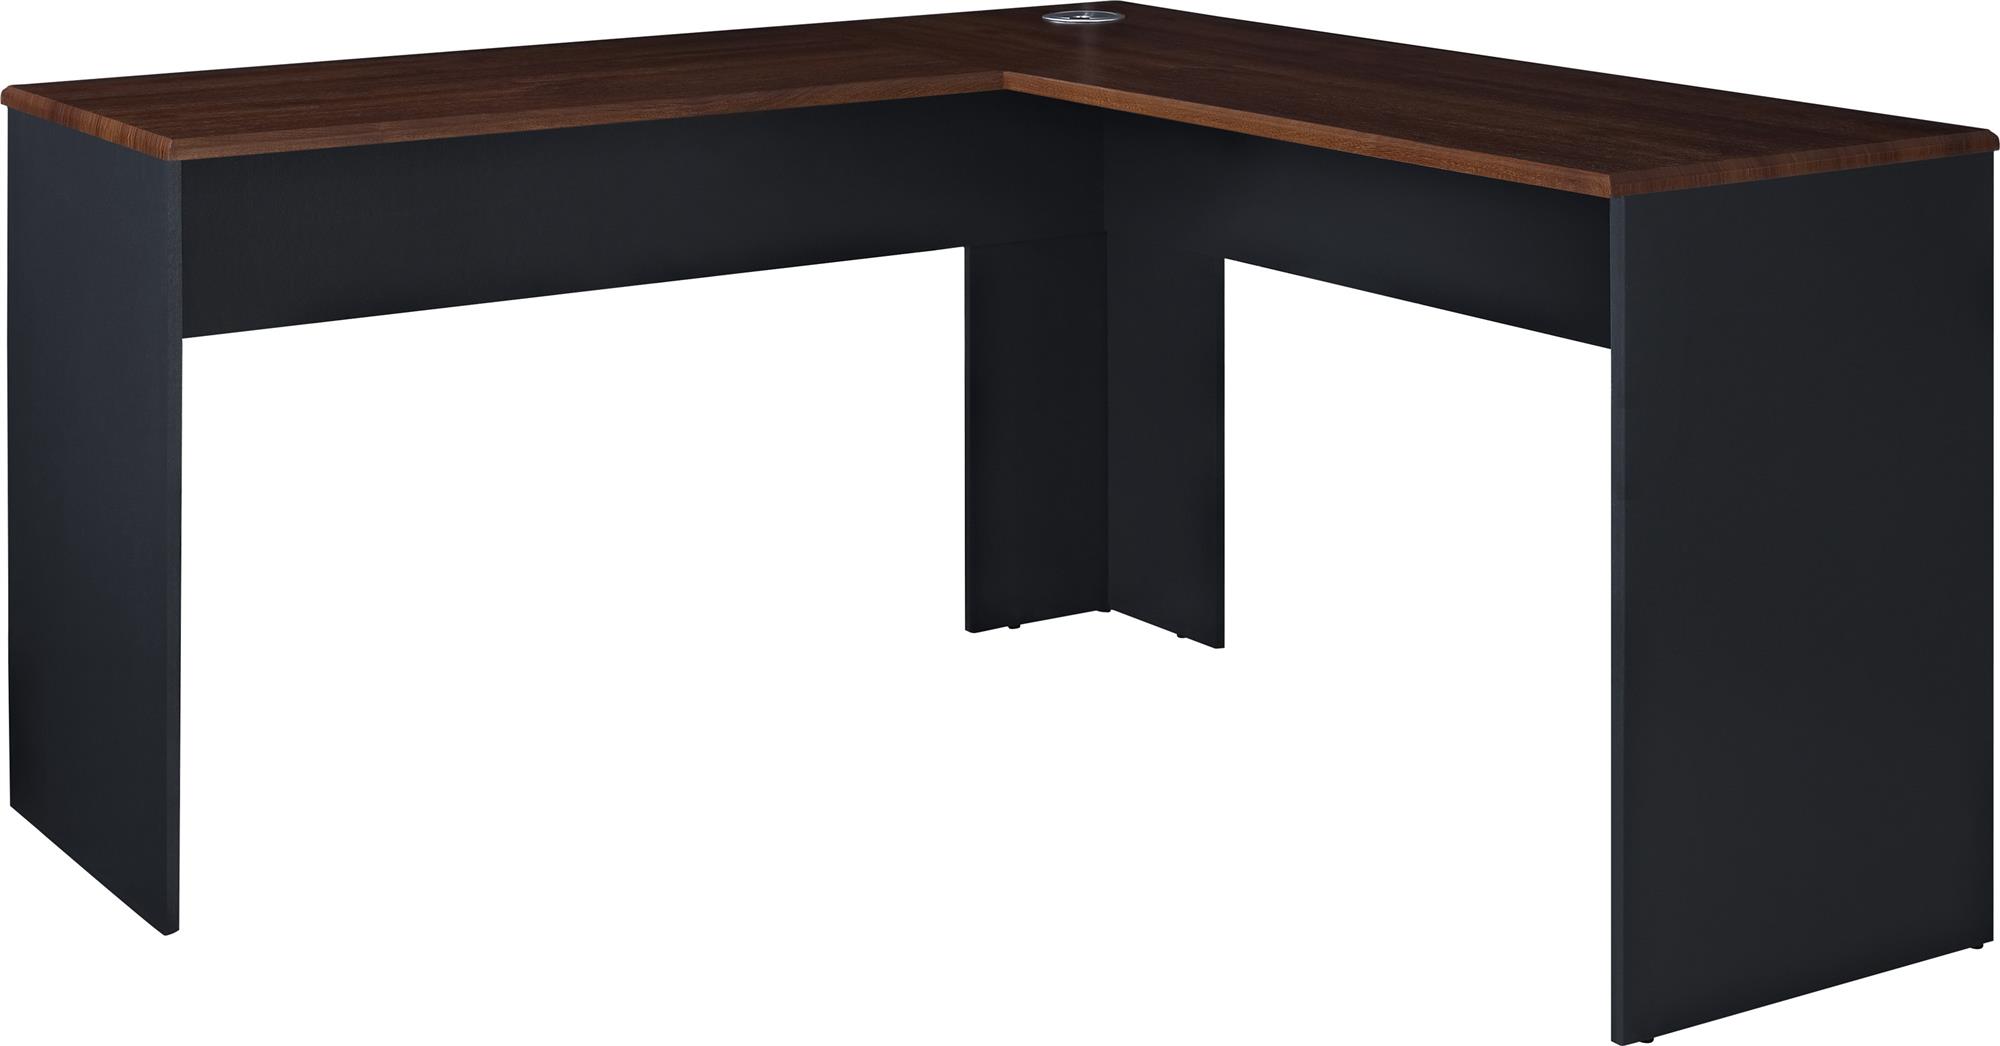 Ameriwood Home Duffield L Desk, Cherry - image 3 of 7